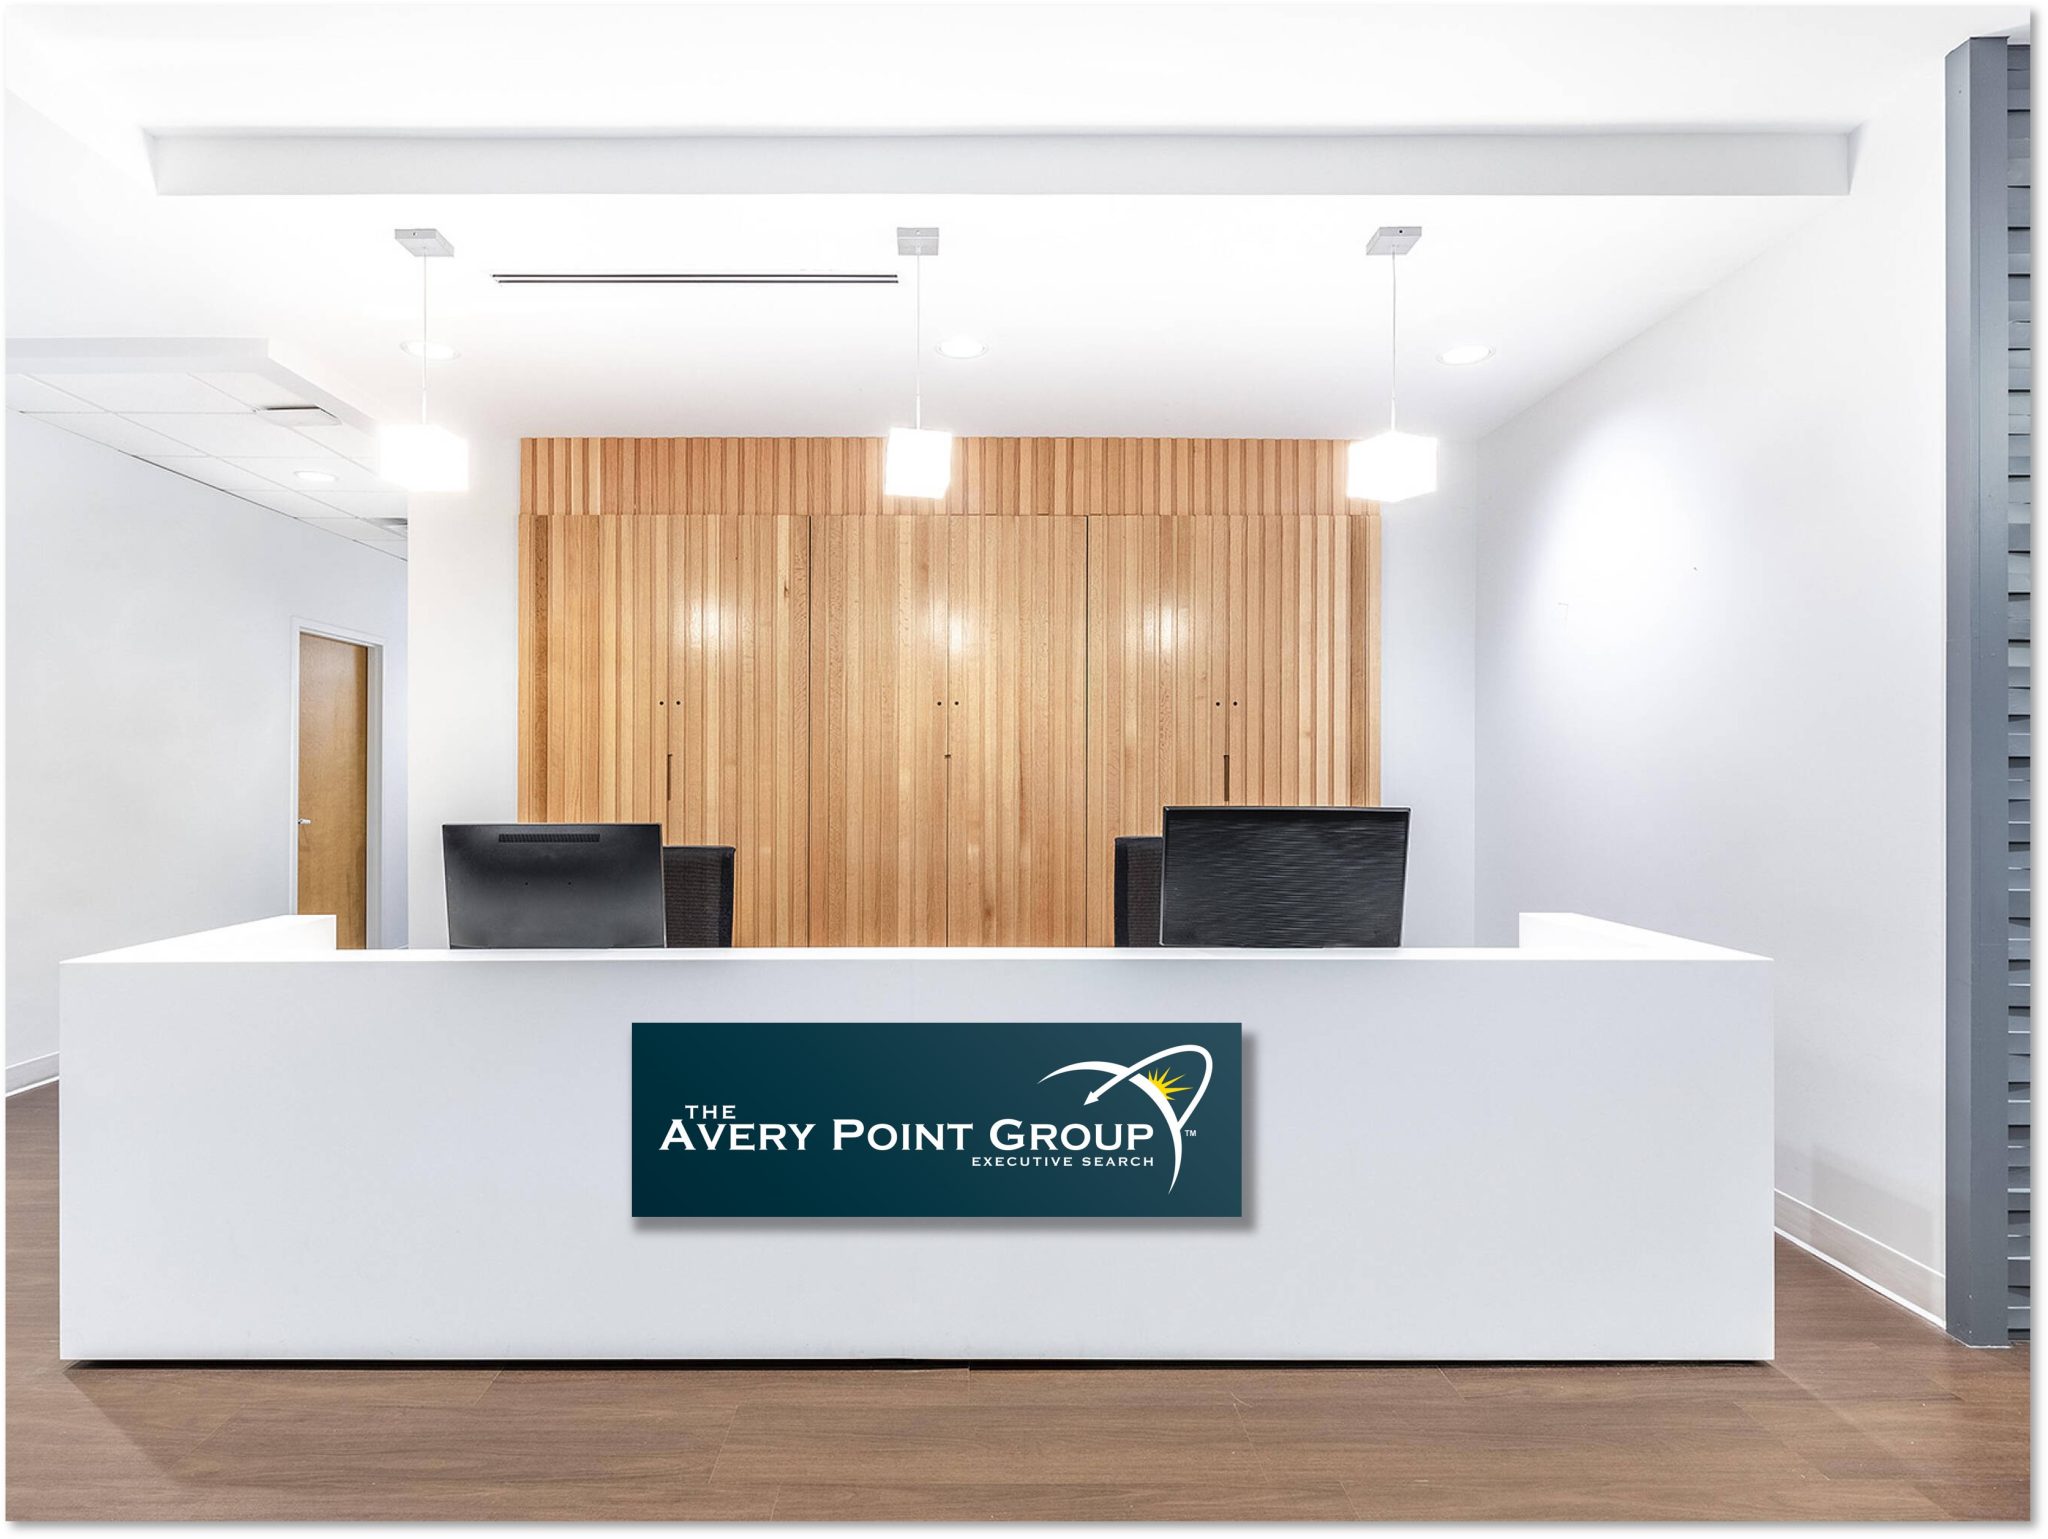 Avery Point Group Offices - Reception Desk